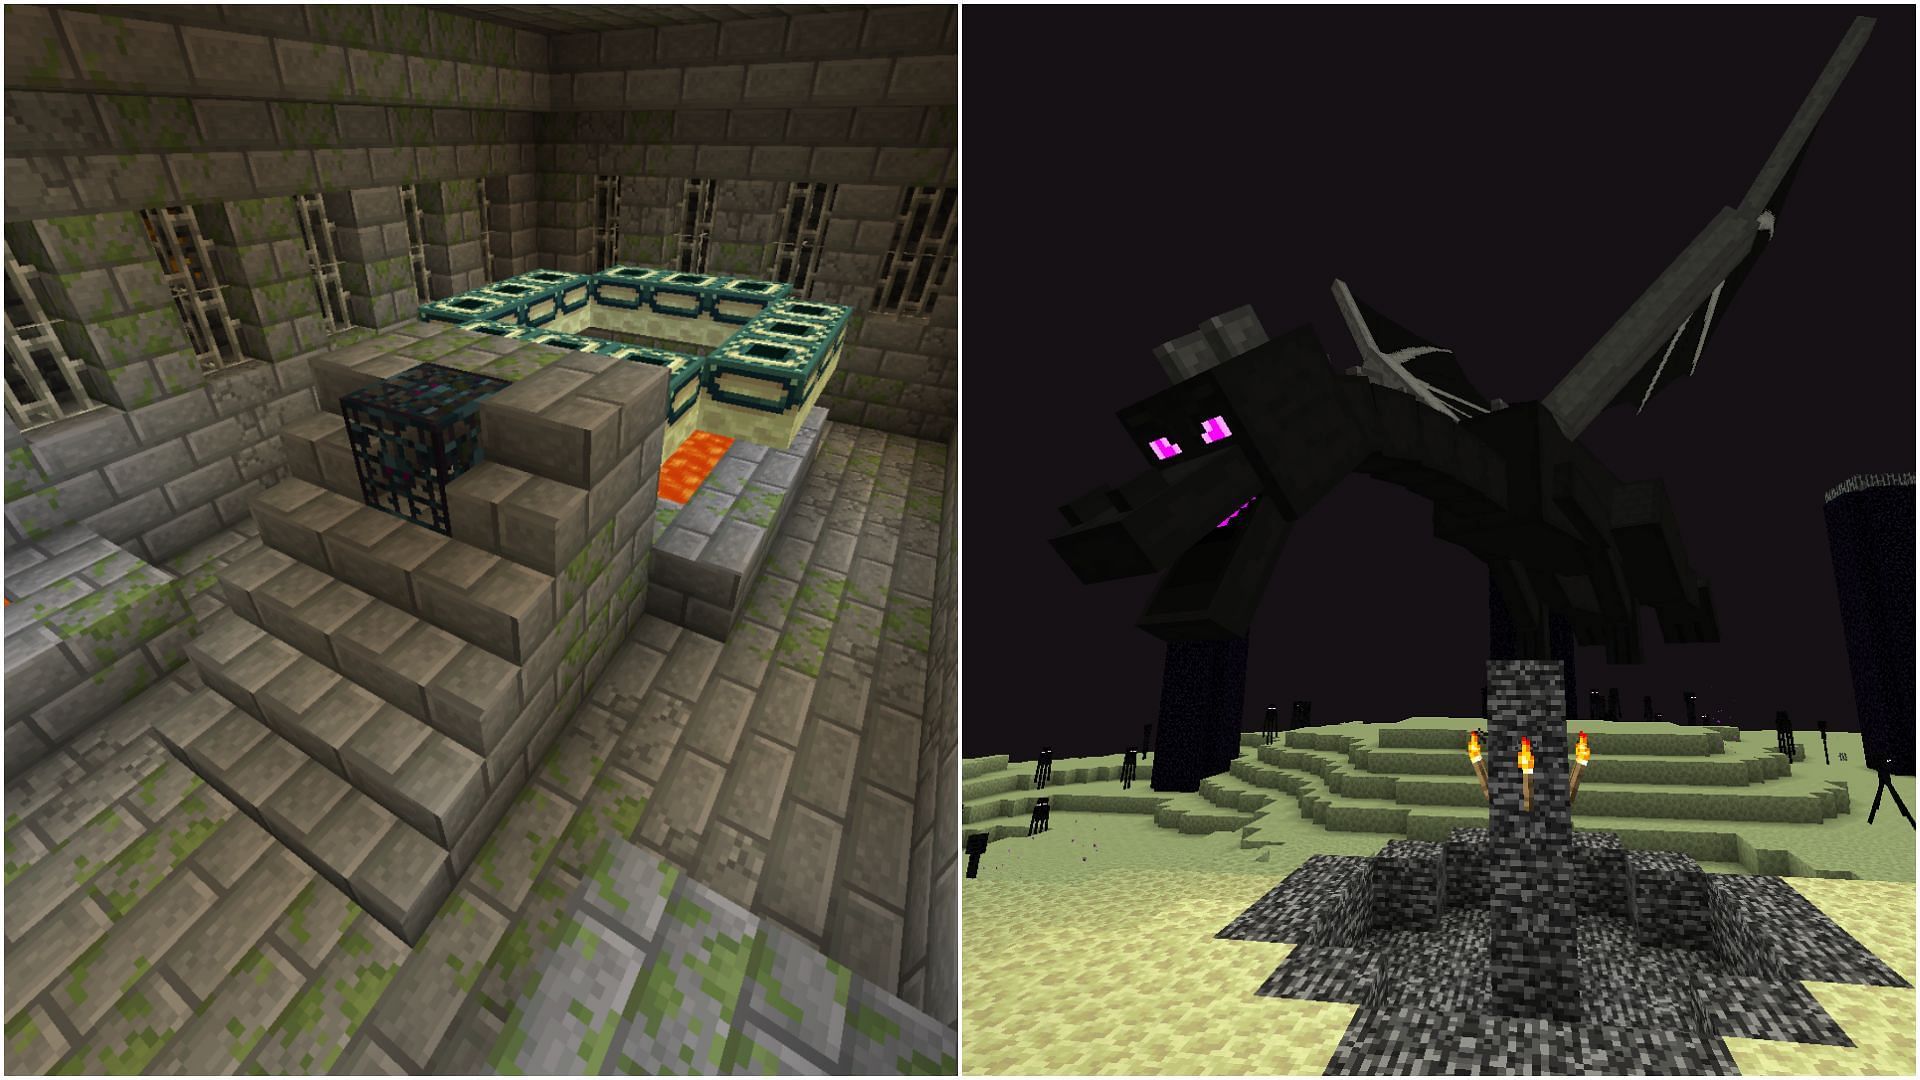 What happens in Minecraft after defeating the Ender Dragon